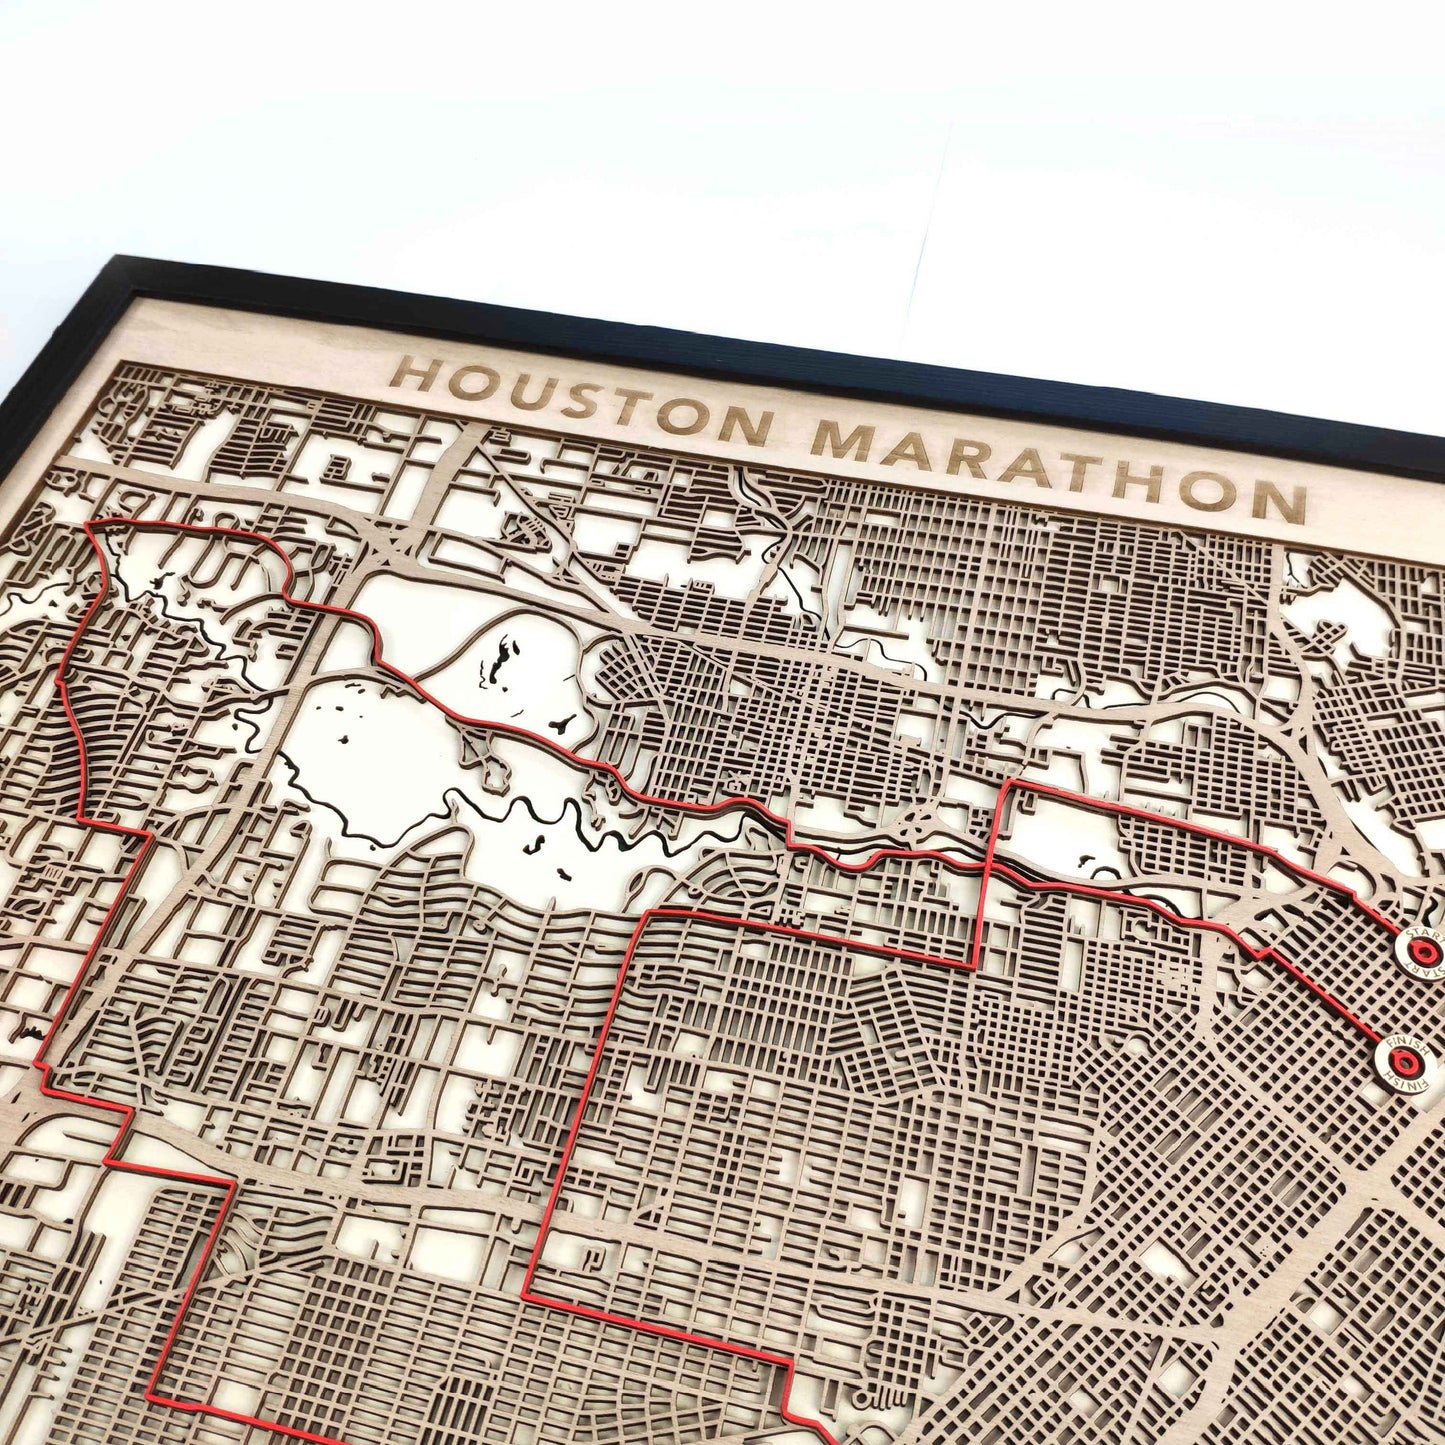 Houston Marathon Wooden Map by CityWood - Custom Wood Map Art - Unique Laser Cut Engraved - Anniversary Gift